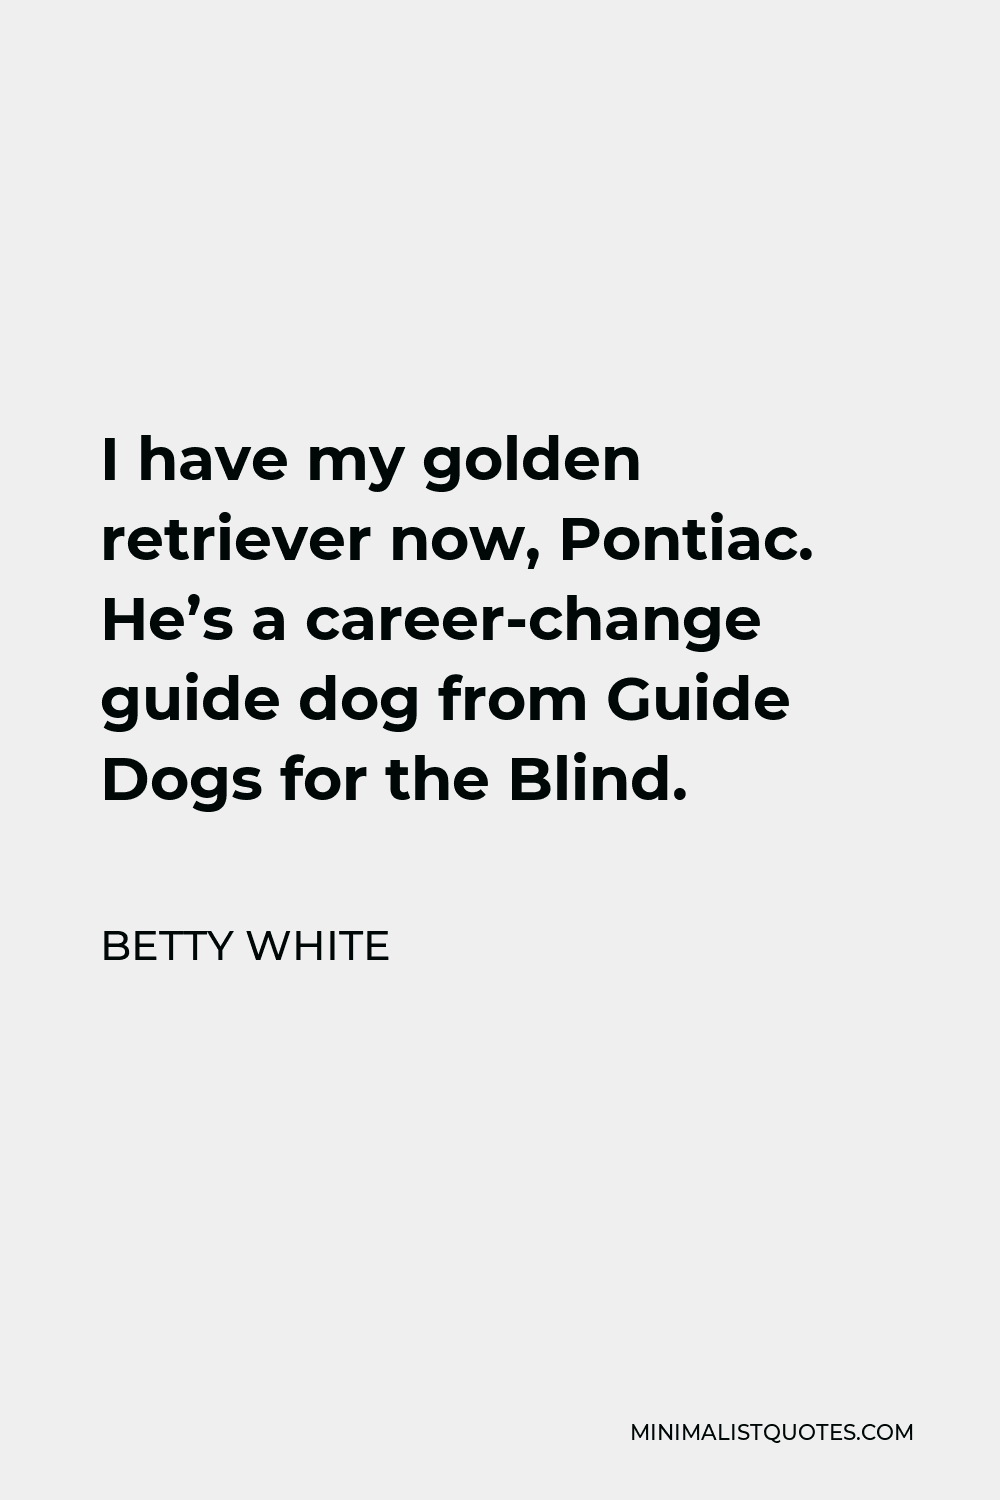 Betty White Quote - I have my golden retriever now, Pontiac. He’s a career-change guide dog from Guide Dogs for the Blind.